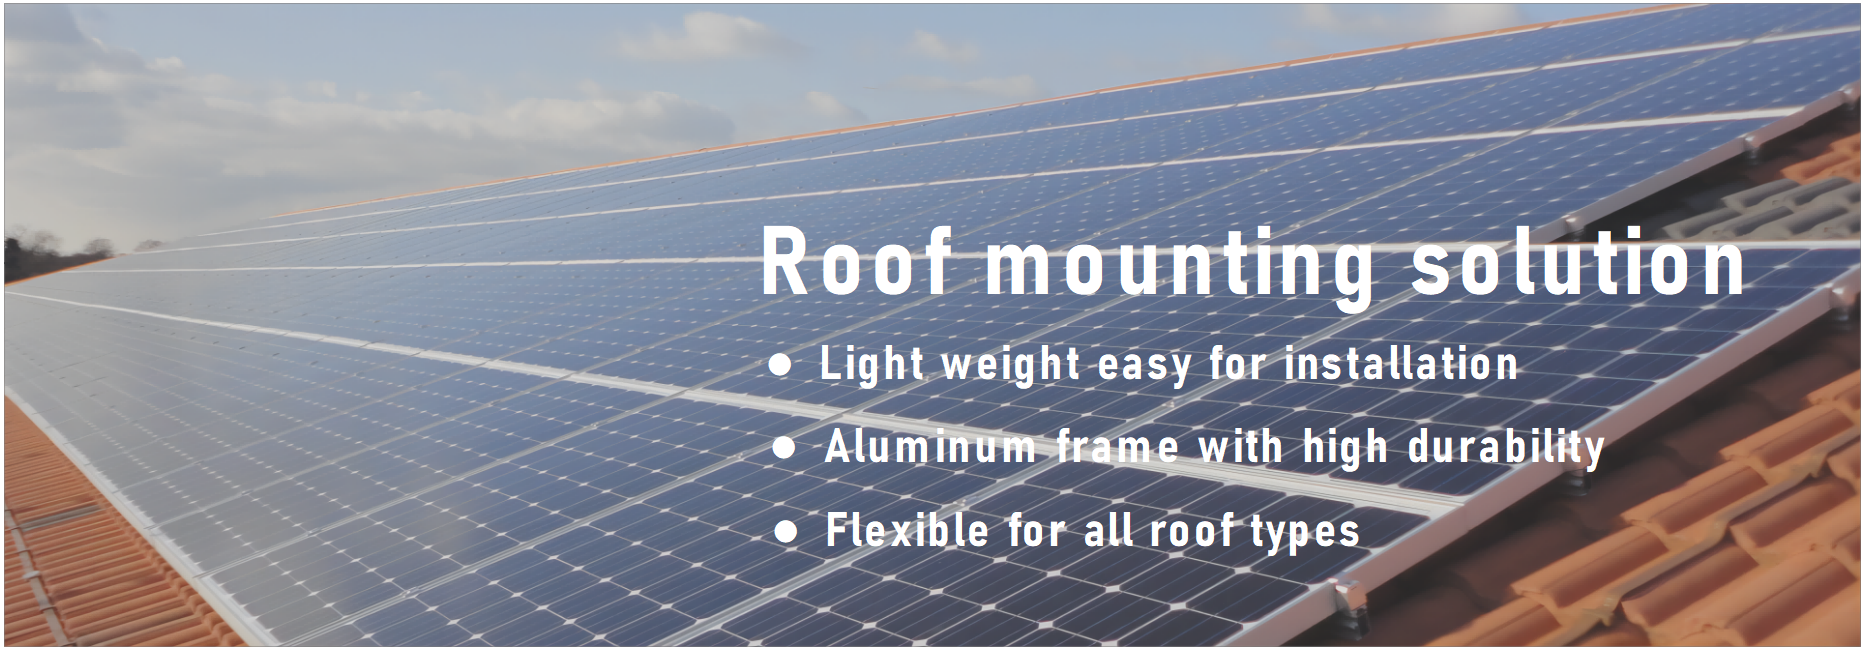 Potentia roof mounting solution